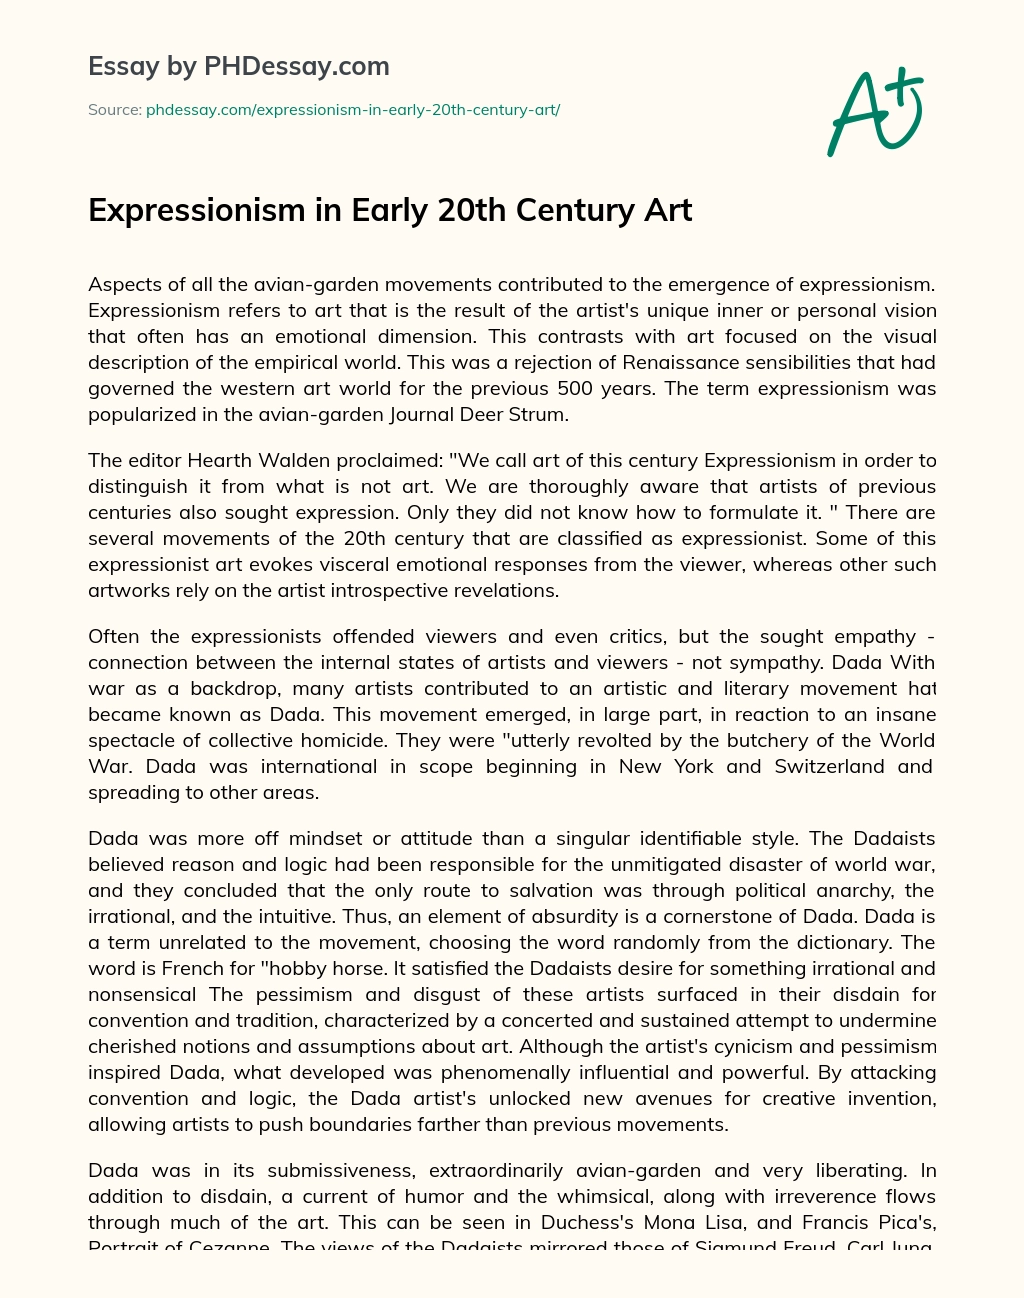 Expressionism in Early 20th Century Art essay